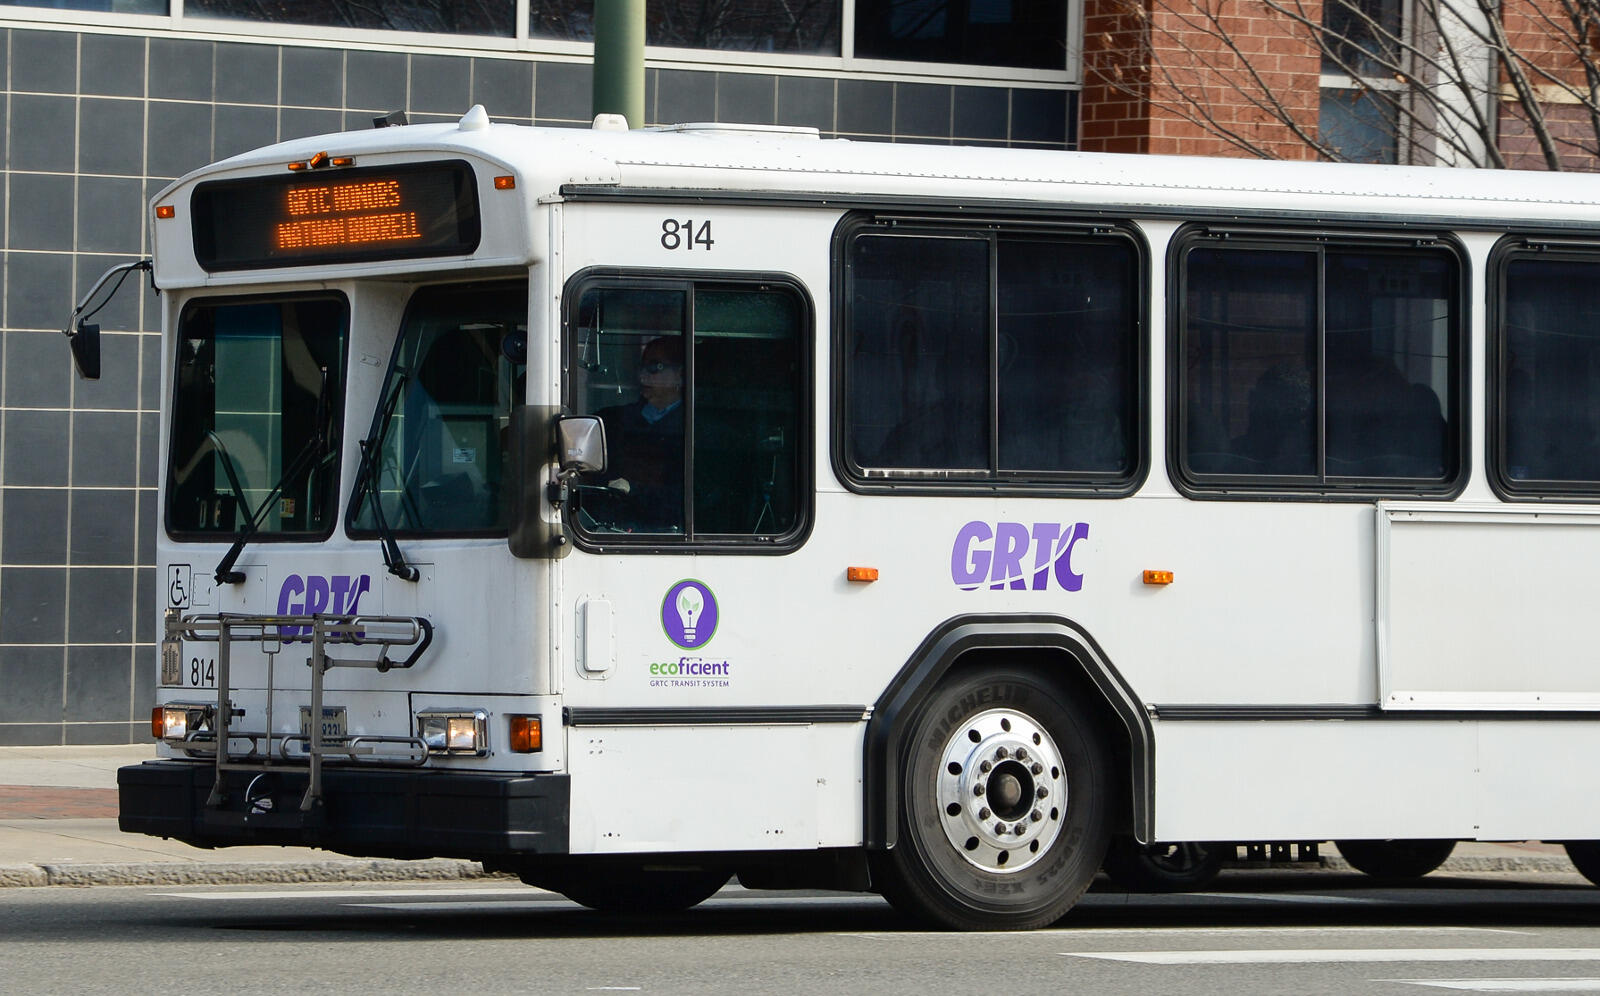 A GRTC bus displays Burrell's name.